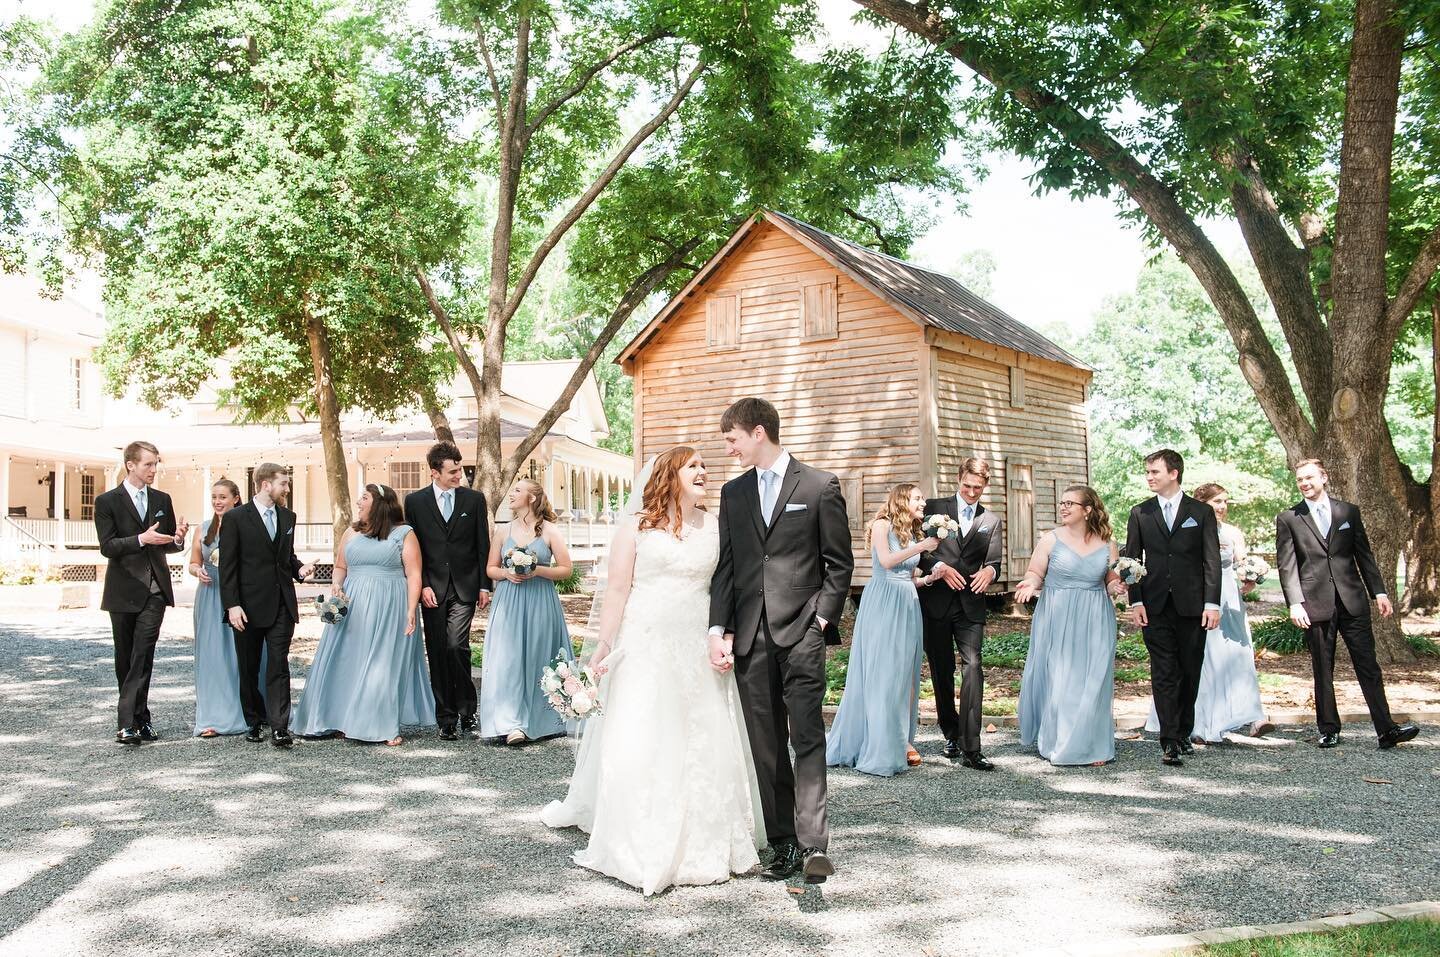 The perfect backdrop for your perfect day. 

www.historicrockhill.com/weddings
(803) 329-1020 | rentals@historicrockhill.com

📸: @kimberly.cauble 
🕺: @hospitalitybutler 
📍: @thewhitehome.rockhill 

#wedding #weddingvenue #rockhill #onlyinoldtown #